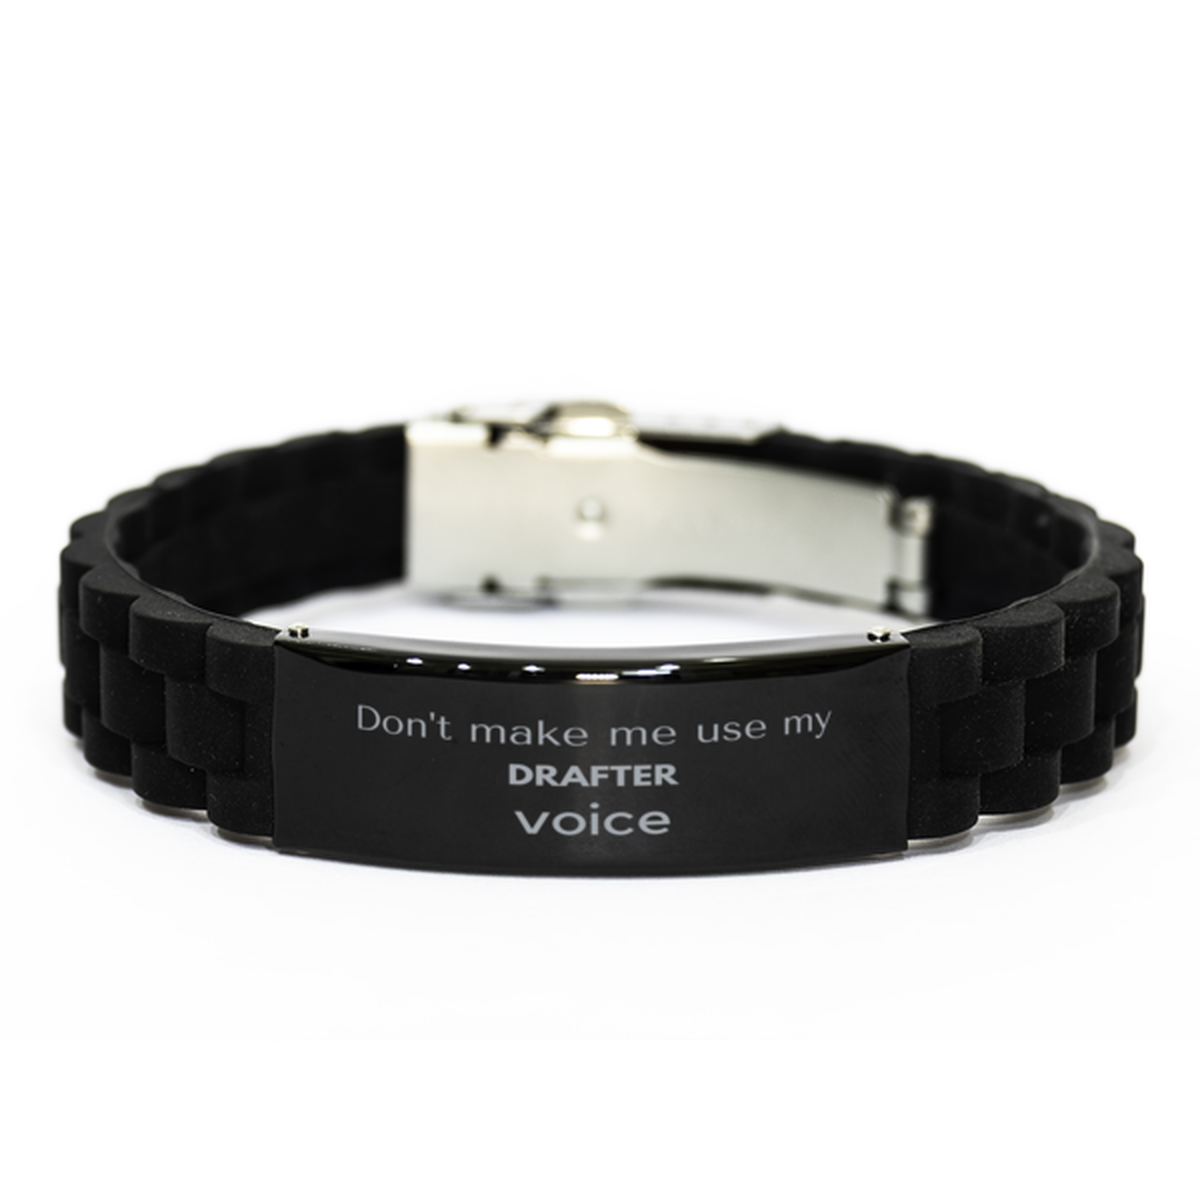 Don't make me use my Drafter voice, Sarcasm Drafter Gifts, Christmas Drafter Black Glidelock Clasp Bracelet Birthday Unique Gifts For Drafter Coworkers, Men, Women, Colleague, Friends